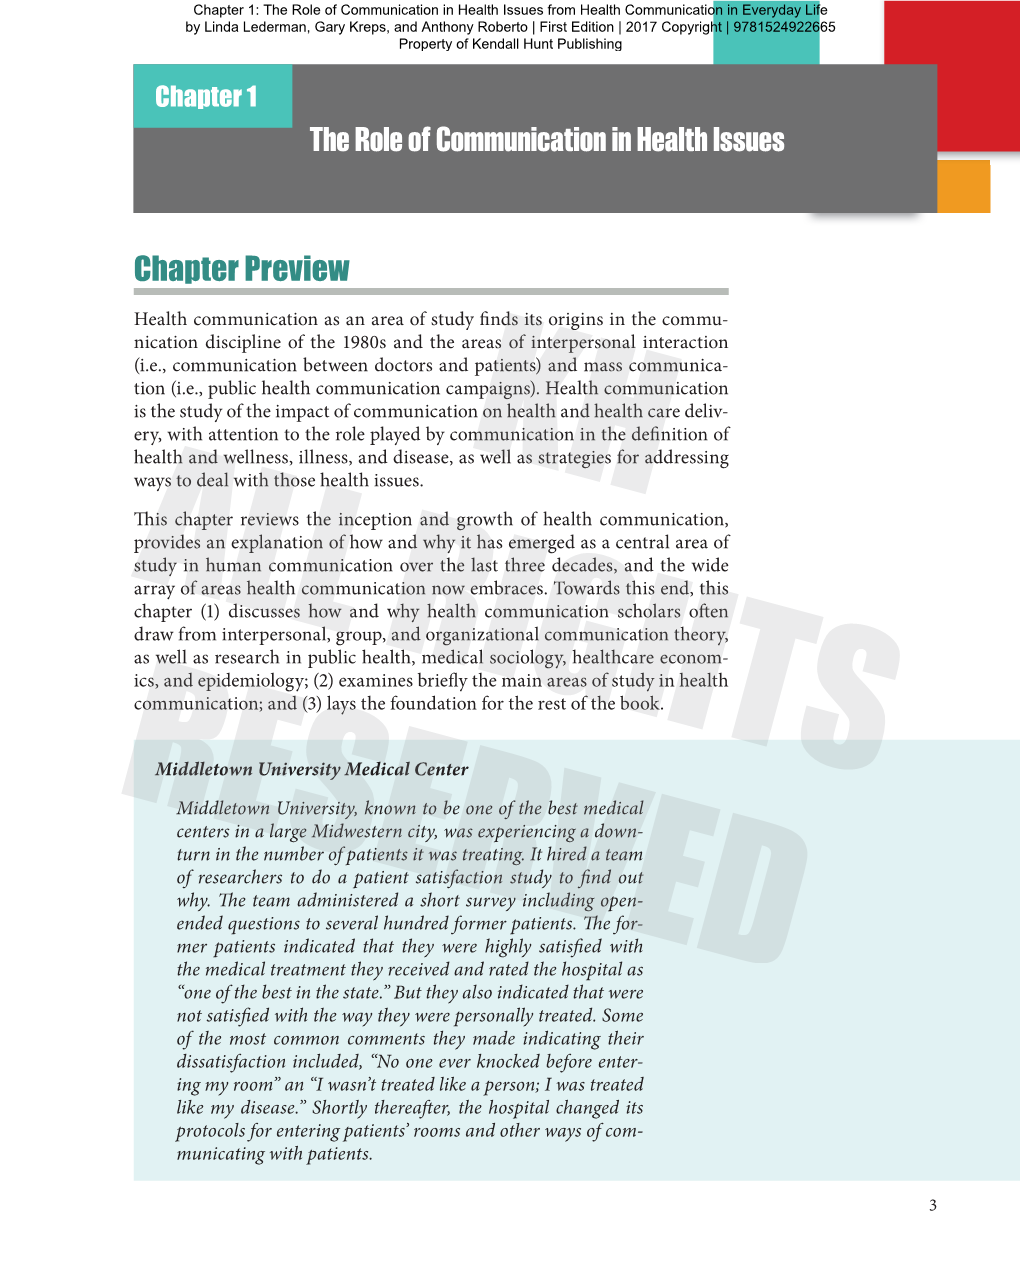 The Role of Communication in Health Issues